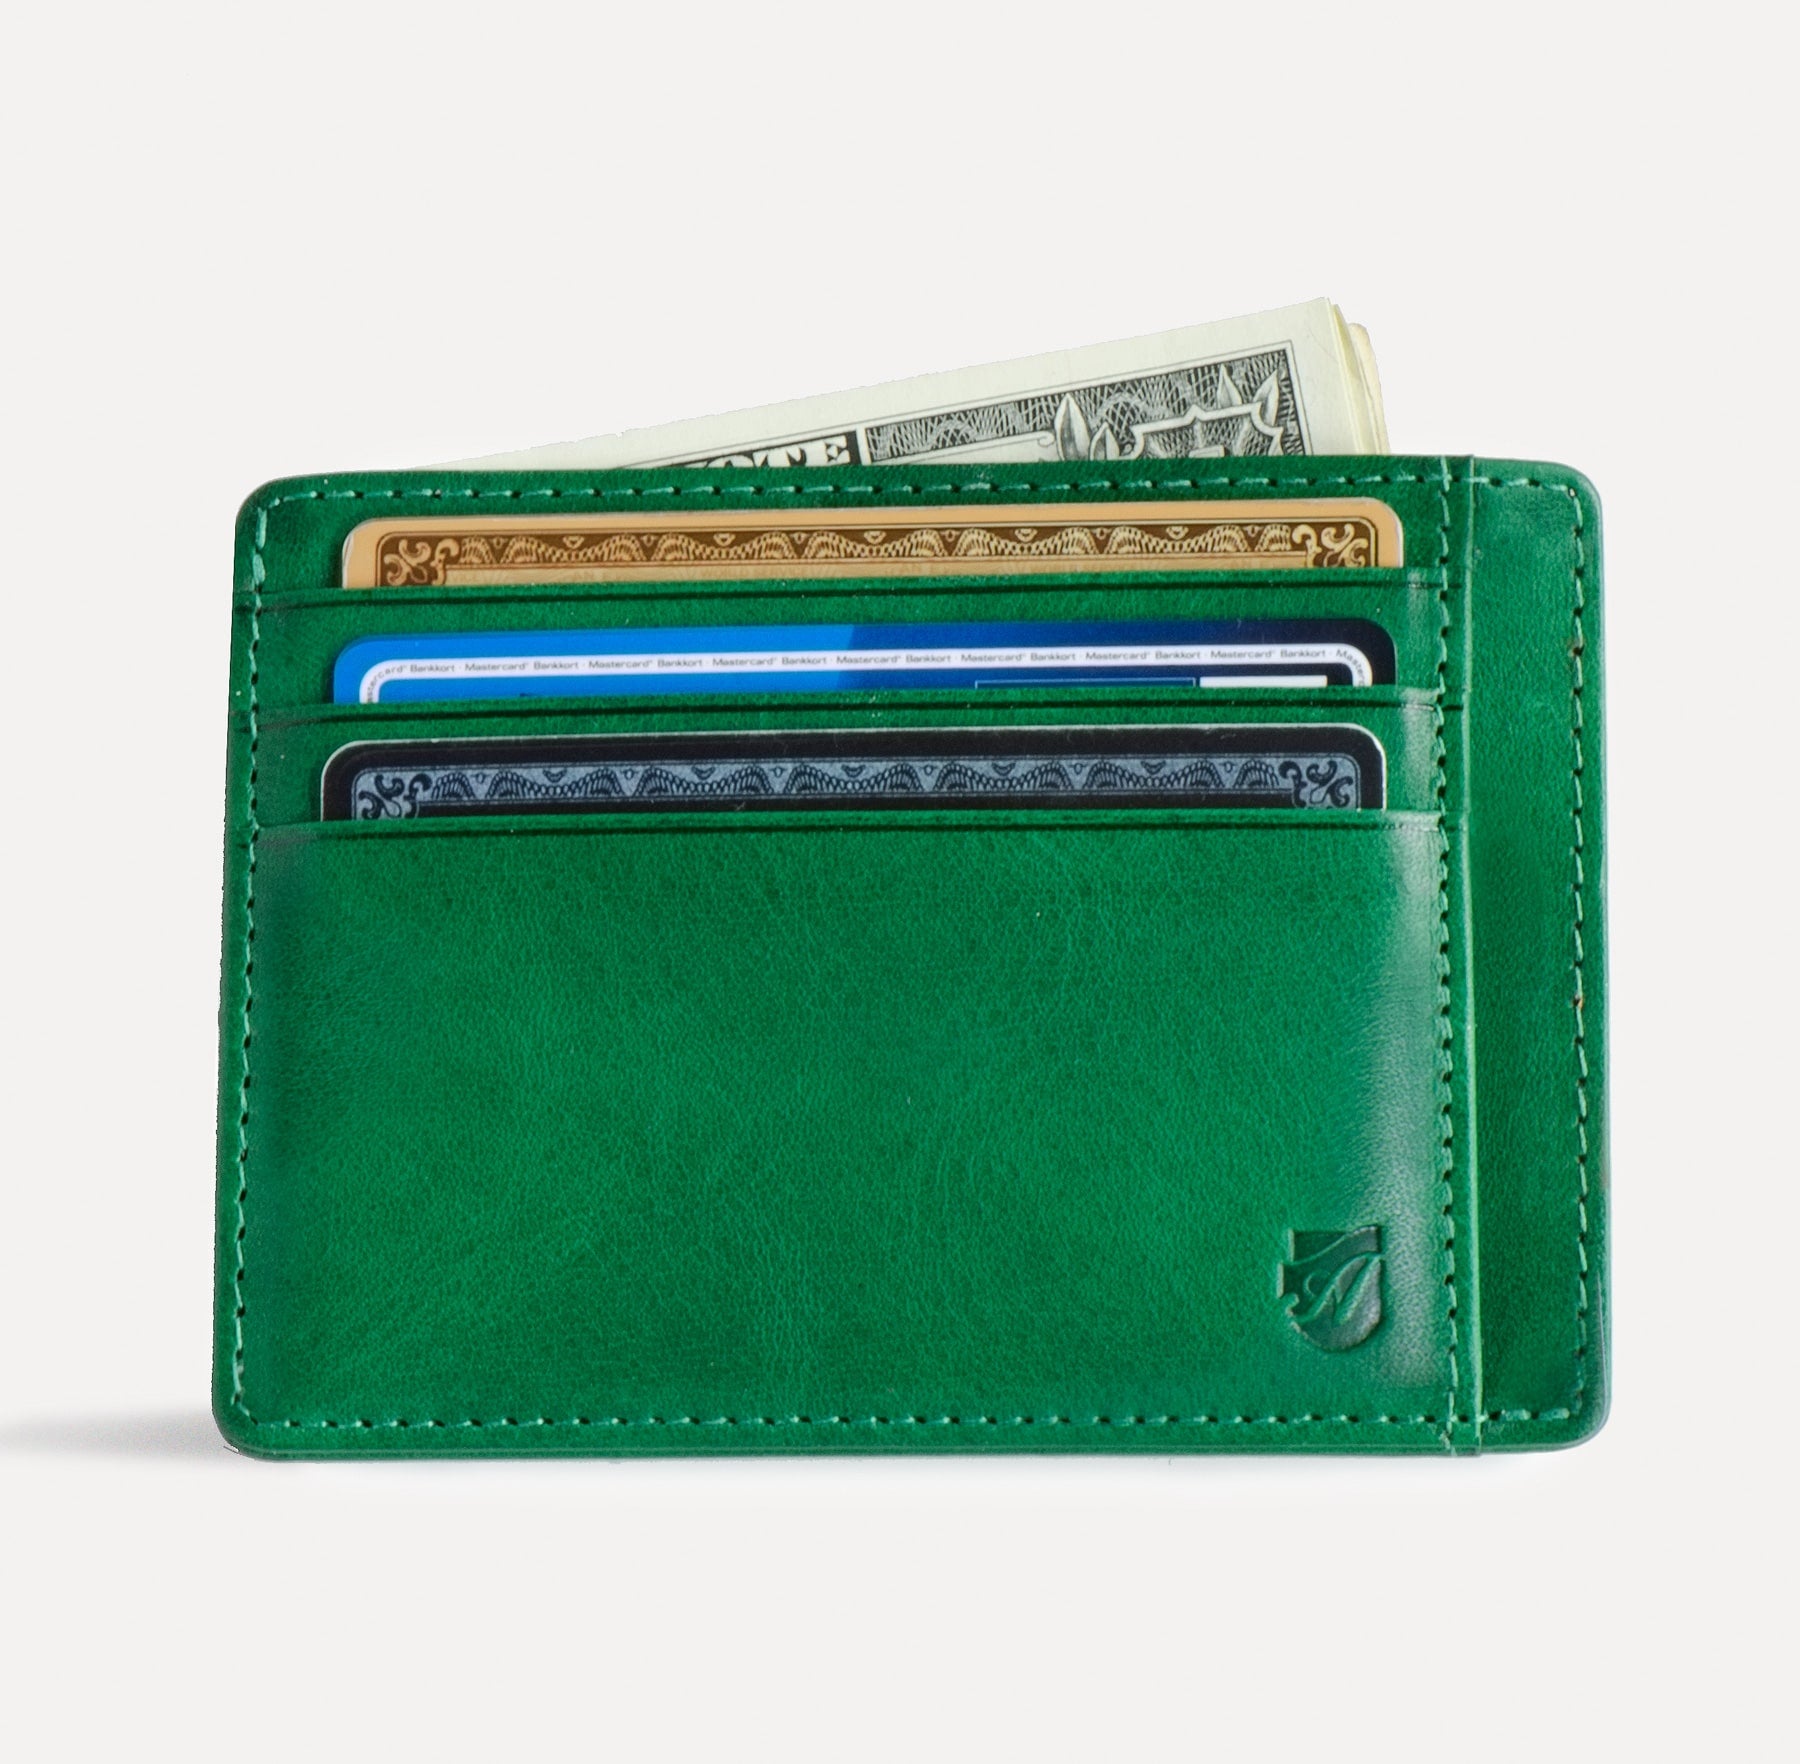 Essential - Vegetable Tanned Leather RFID-blocking Key Wallet (blue) -  axesswallets